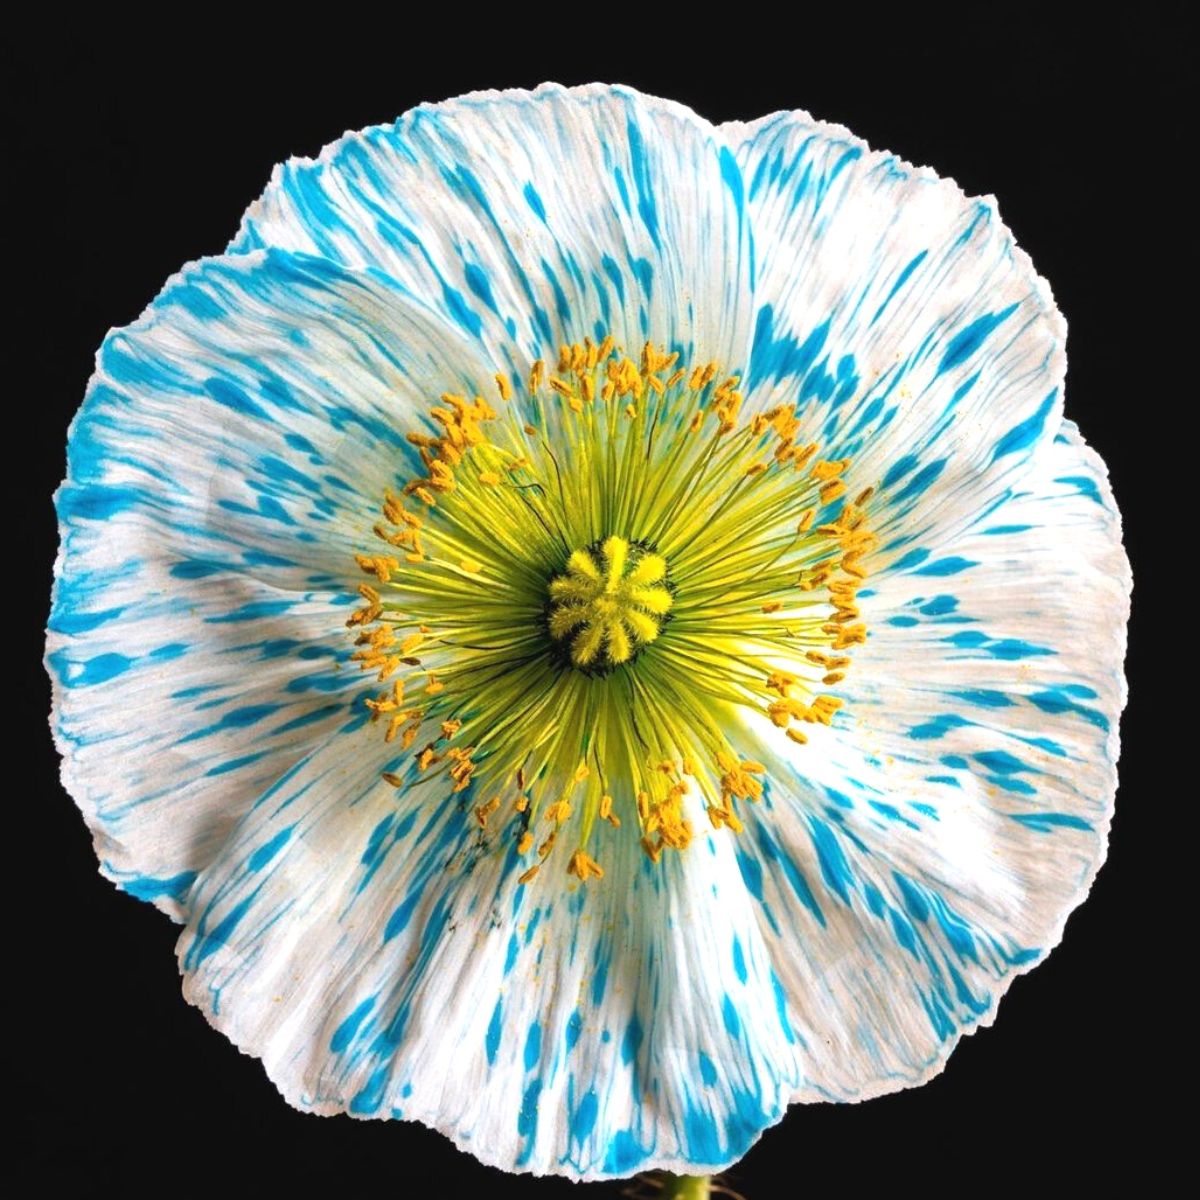 Rare flower with spots photograph